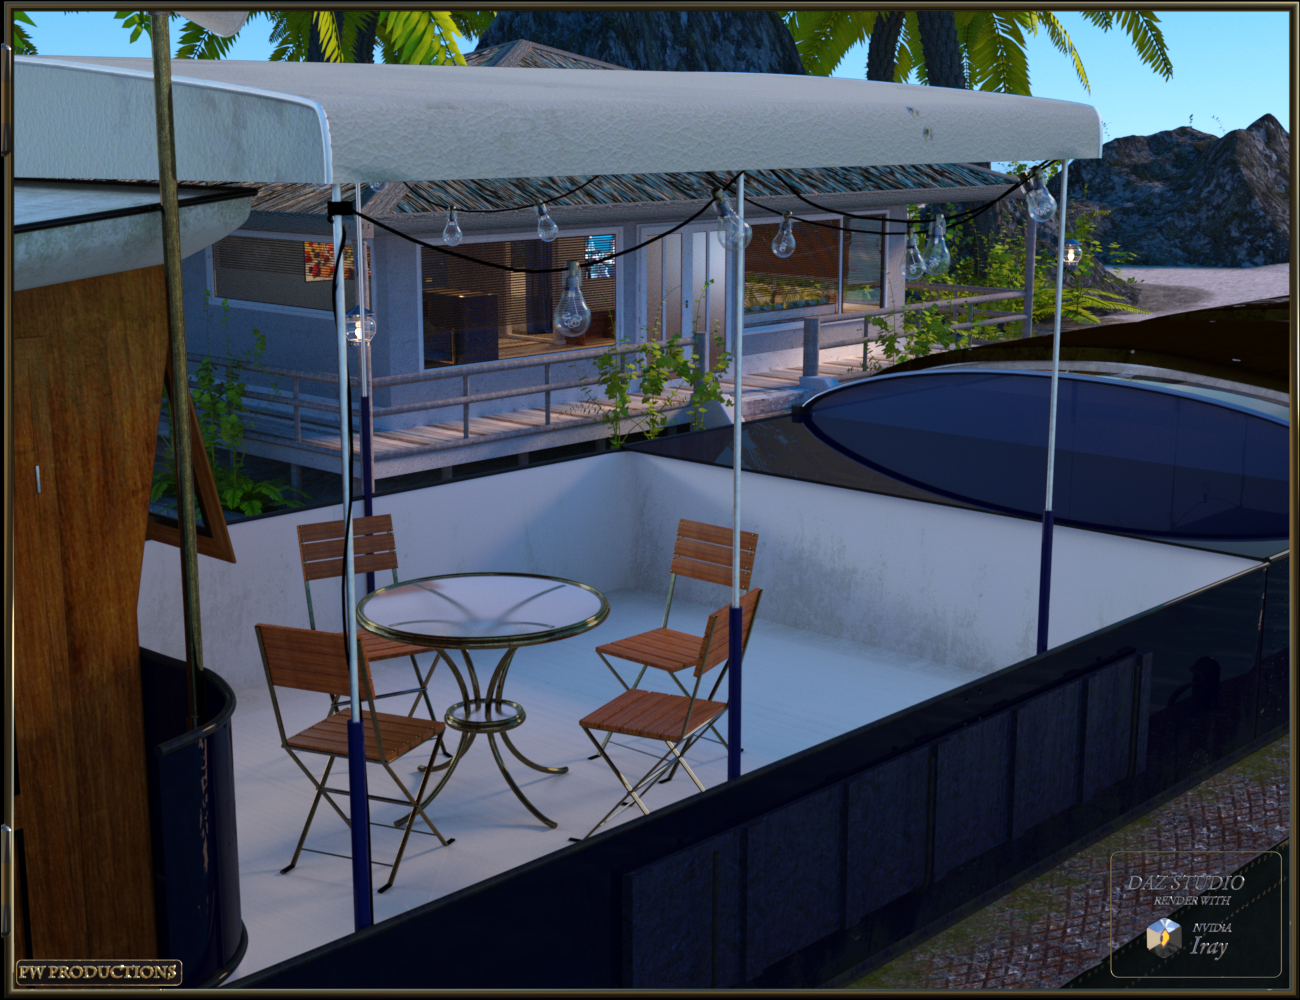 PW Luxurious House Boat by: PW Productions, 3D Models by Daz 3D